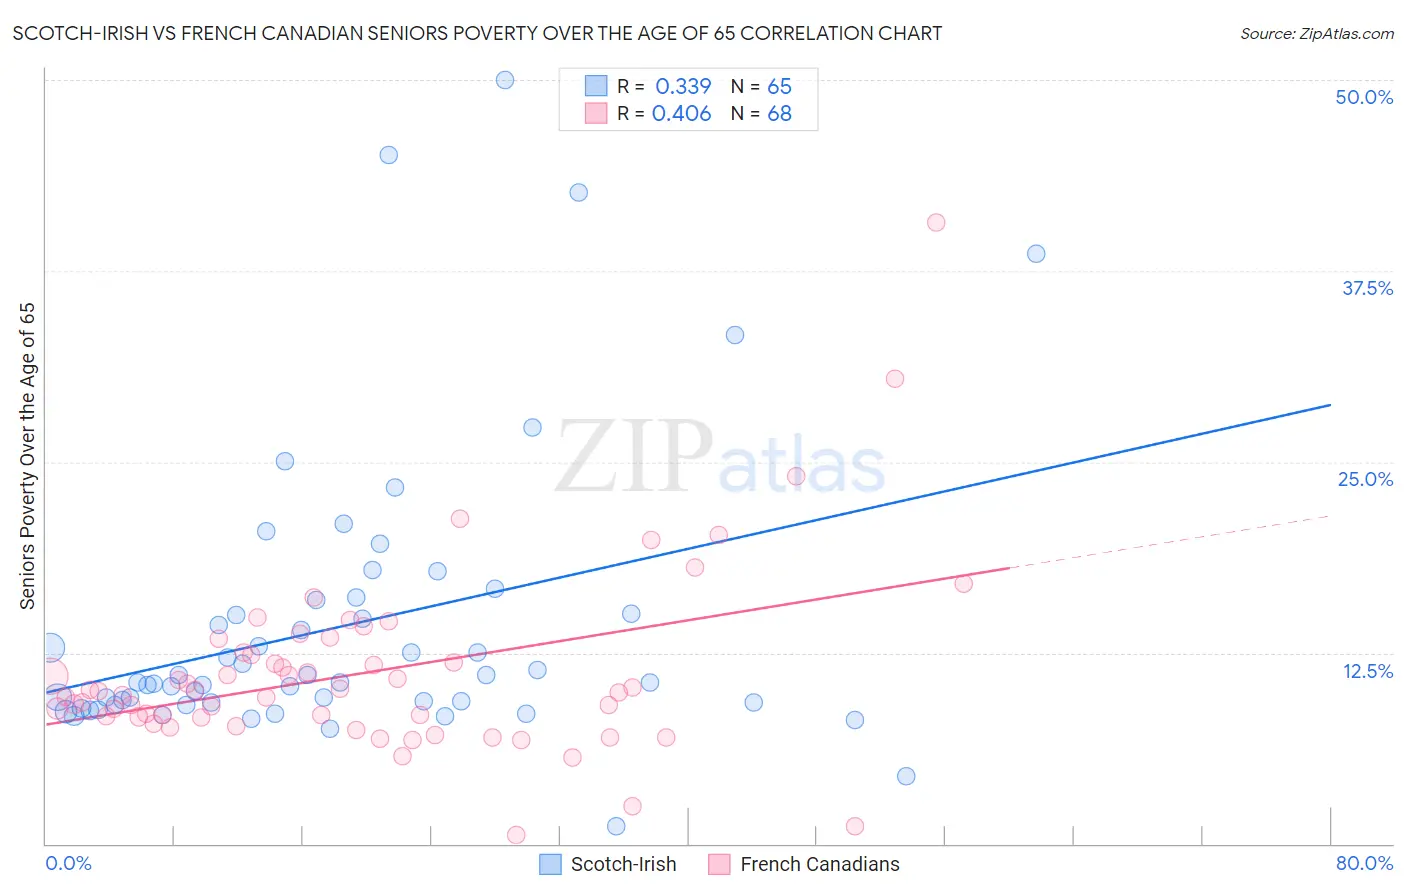 Scotch-Irish vs French Canadian Seniors Poverty Over the Age of 65